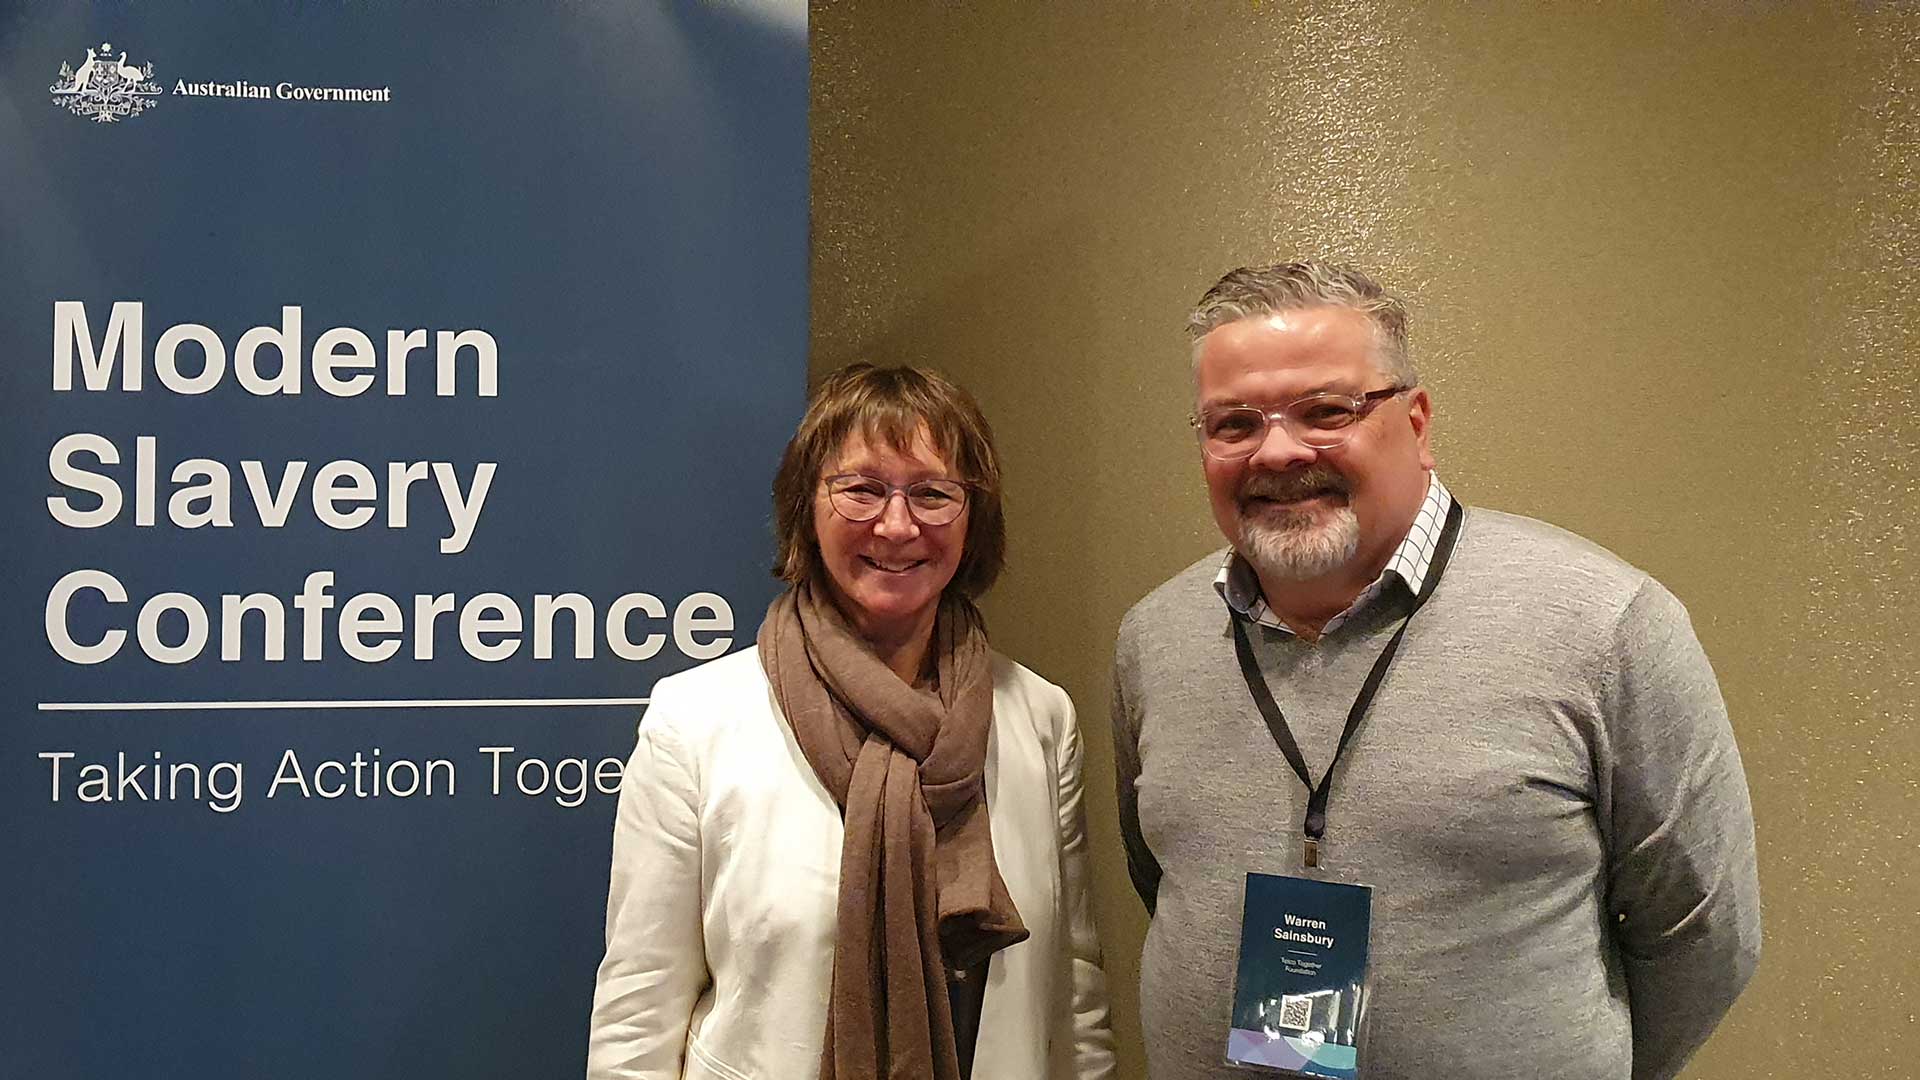 Carin Lavery and Warren Sainsbury from Telco Together Foundation at the Modern Slavery Conference